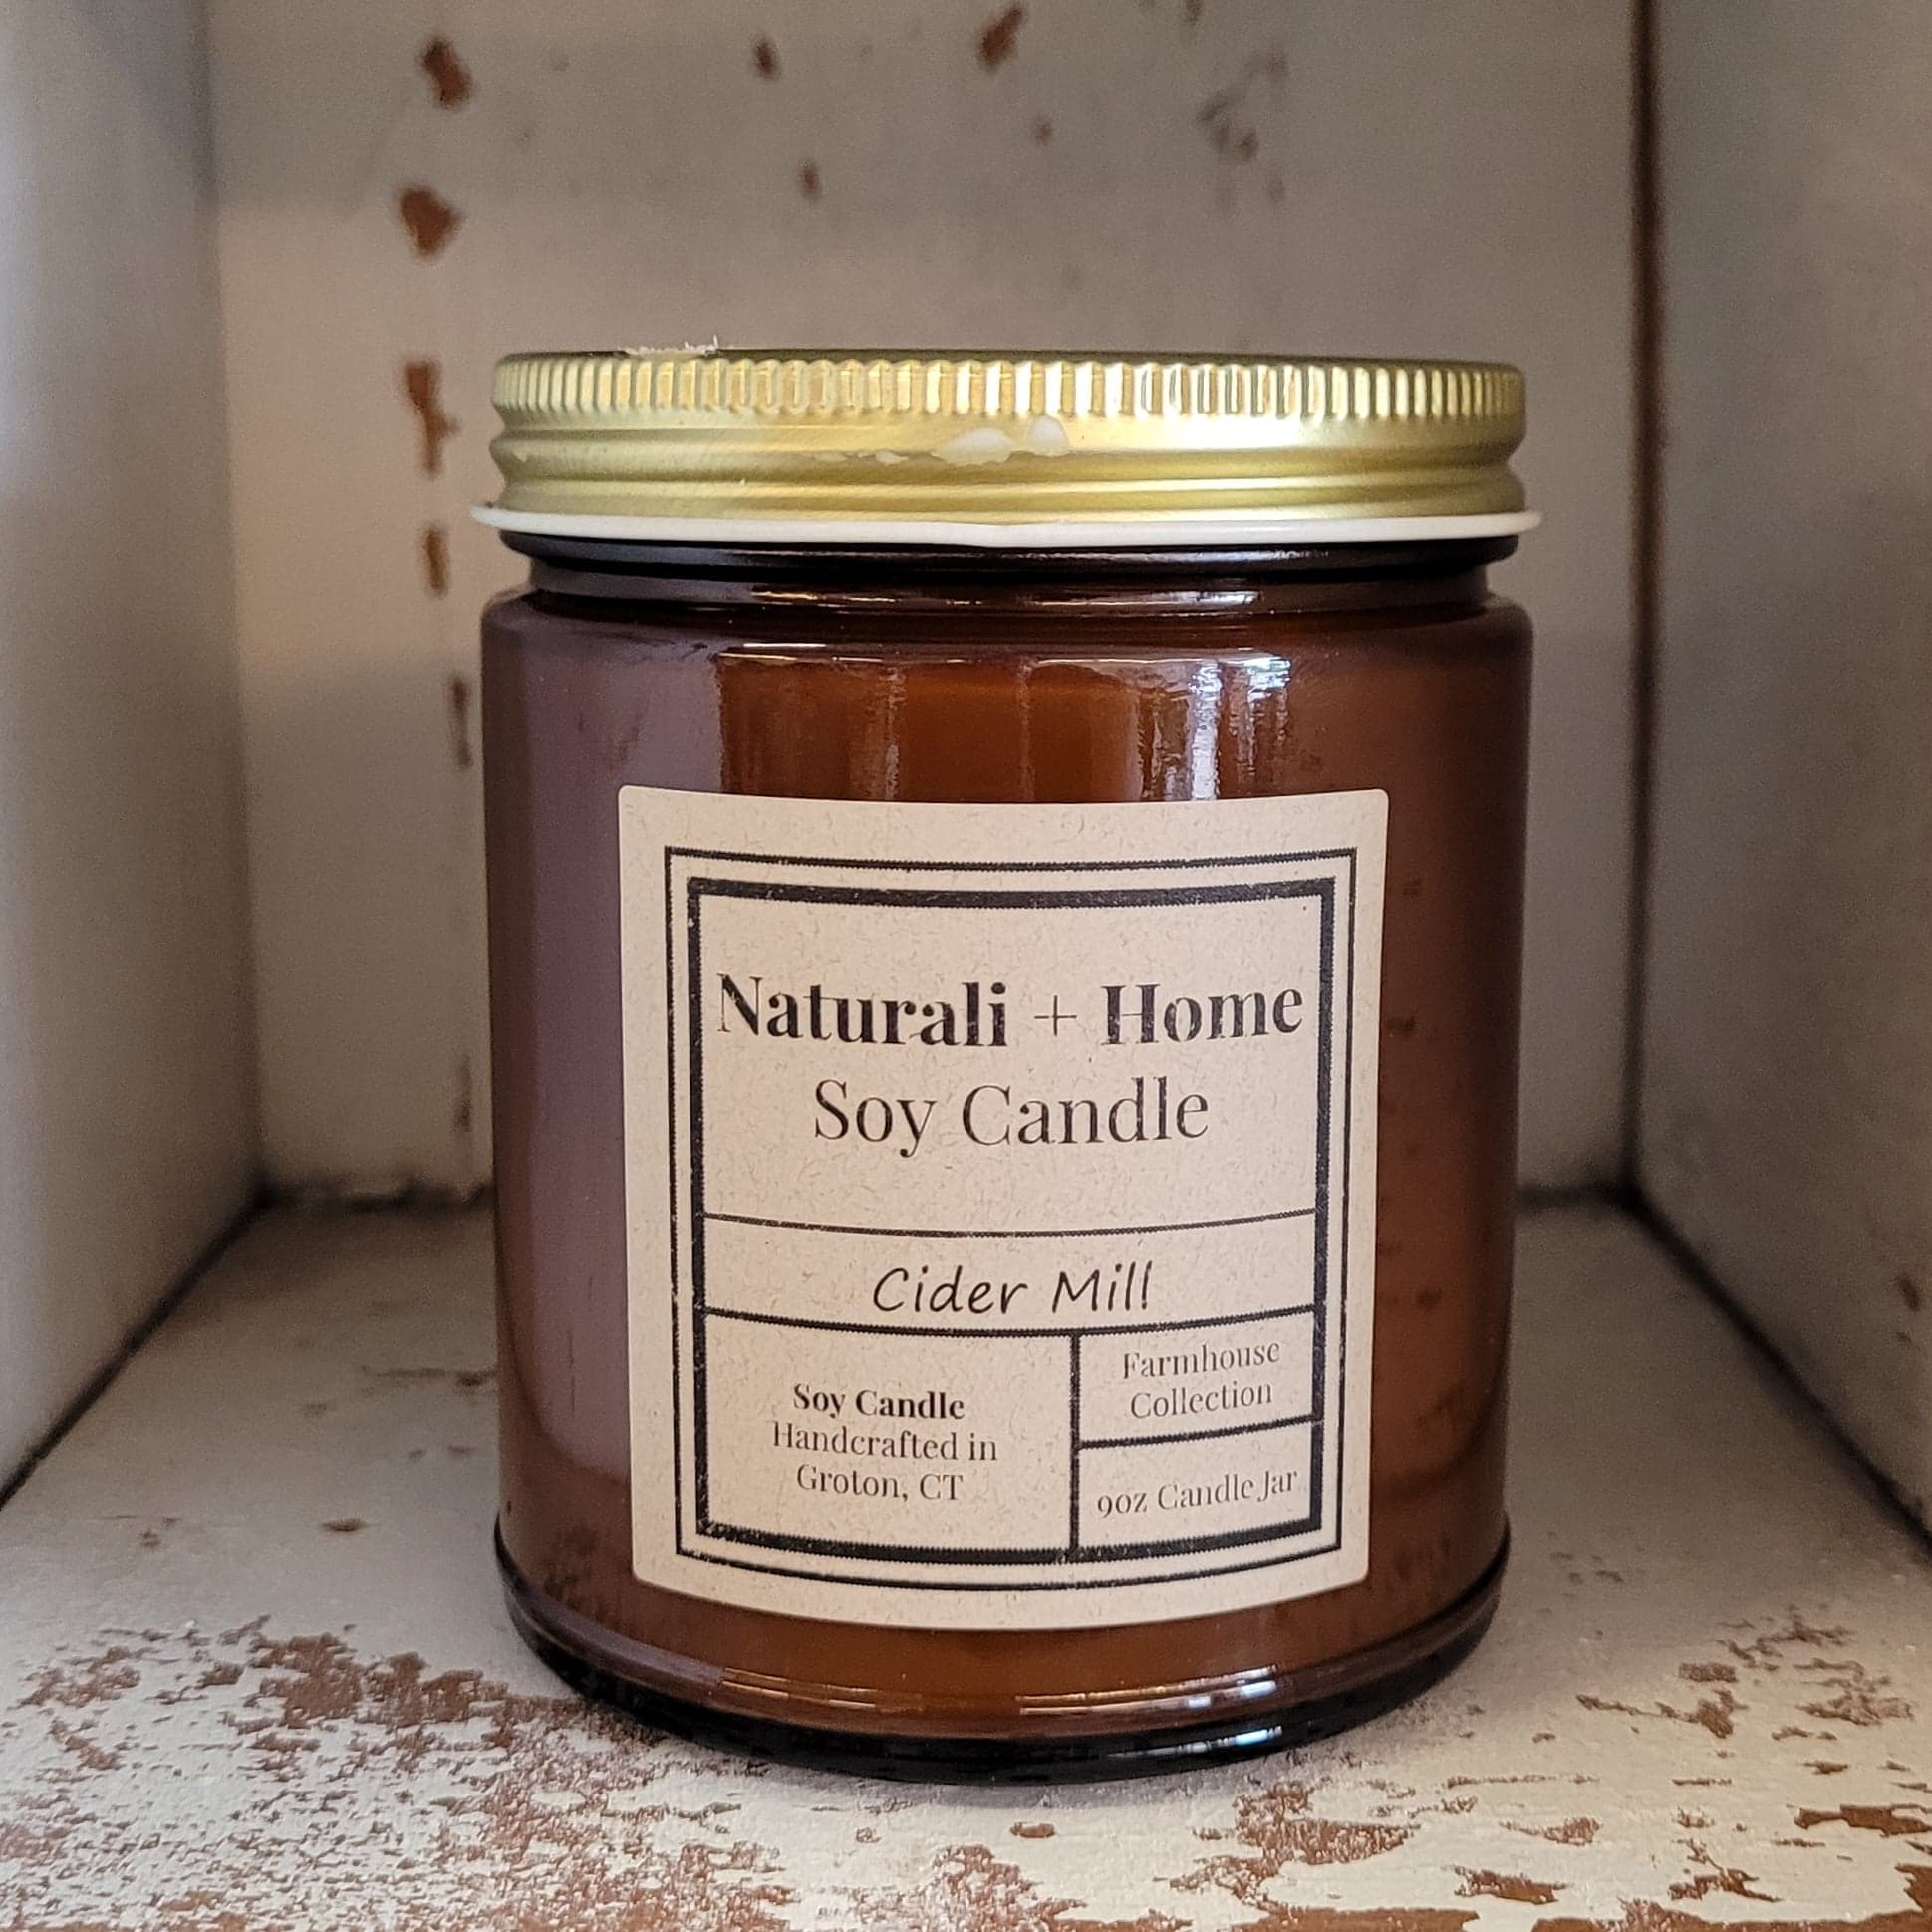 Cider Mill Soy Candle - Naturali Home